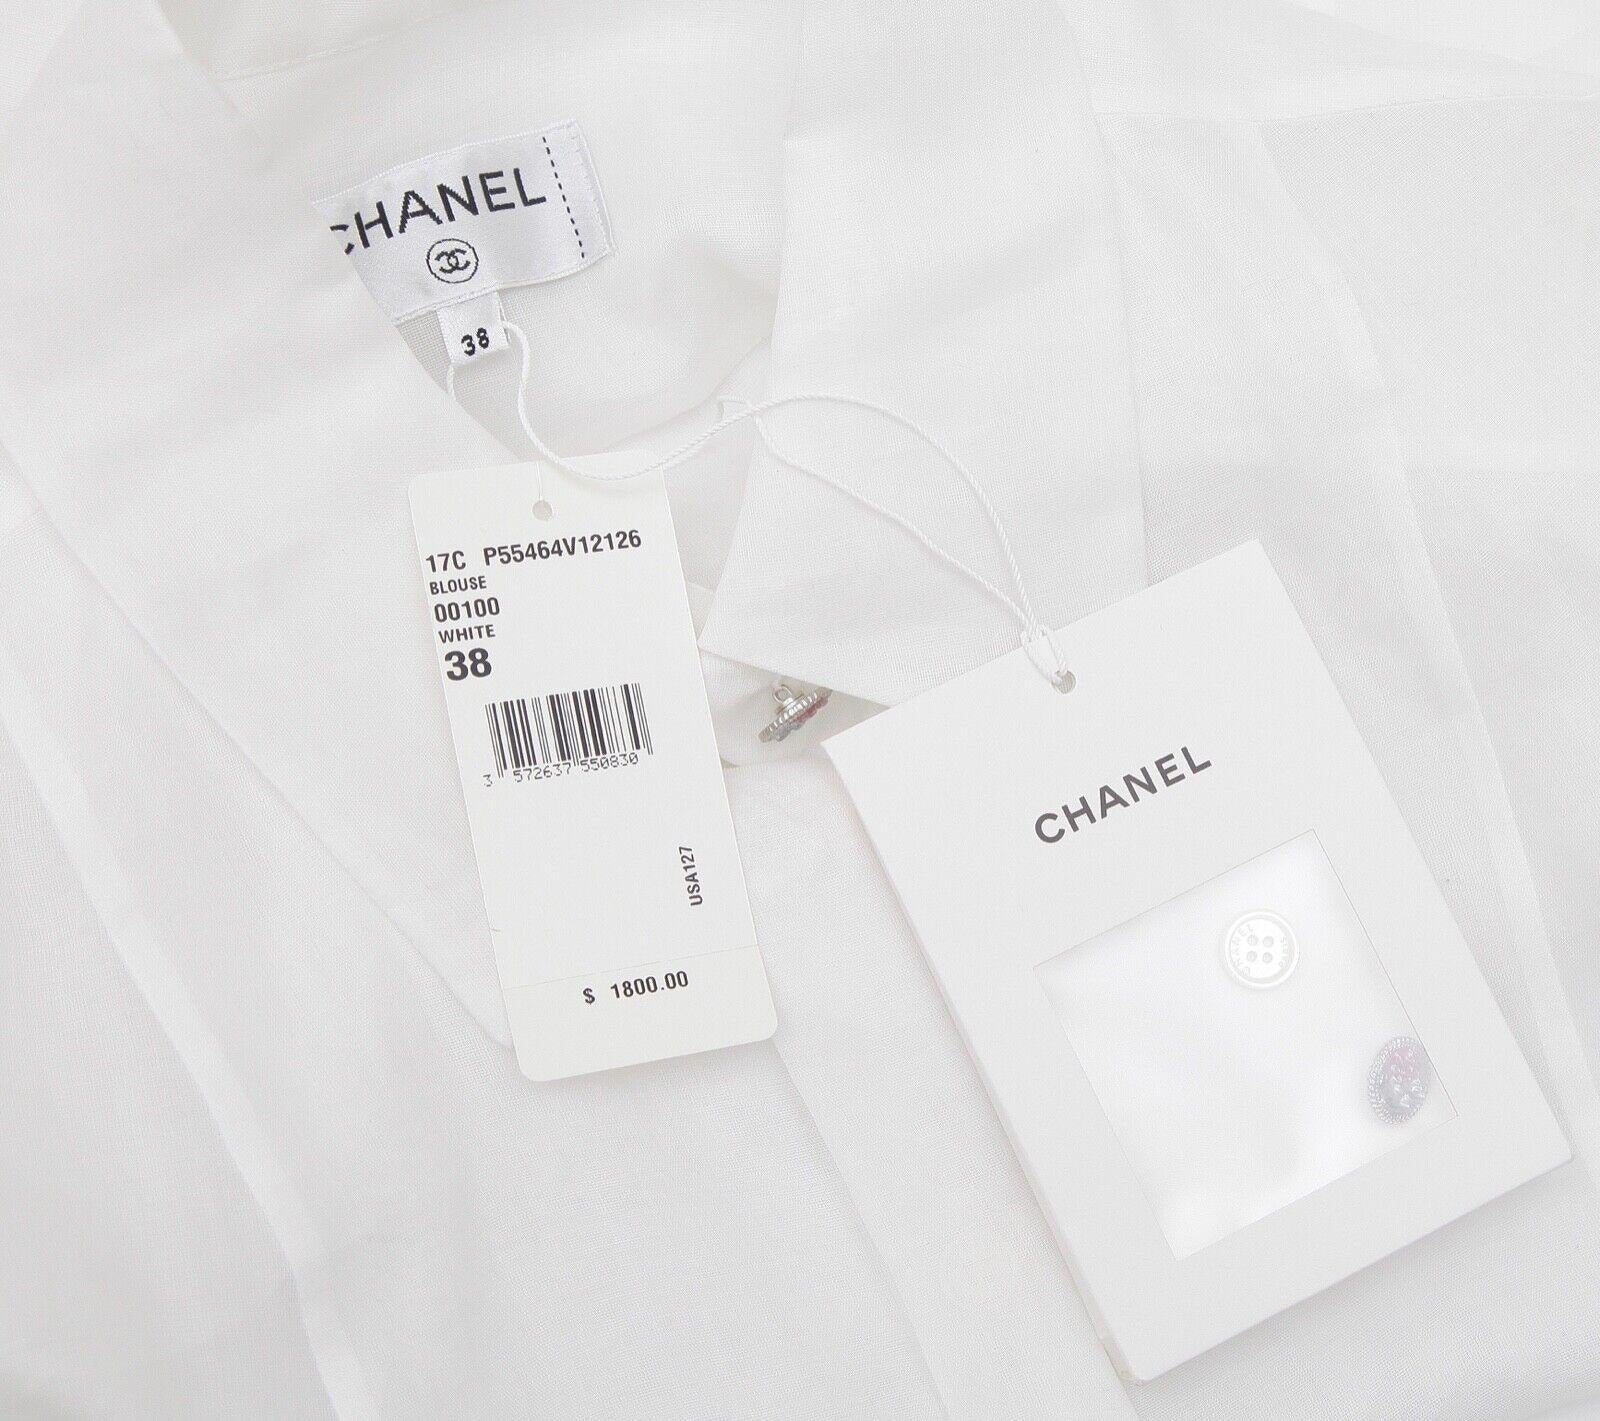 CHANEL White Blouse Top Long Sleeve Cotton 2017 17C $1800 NWT 4